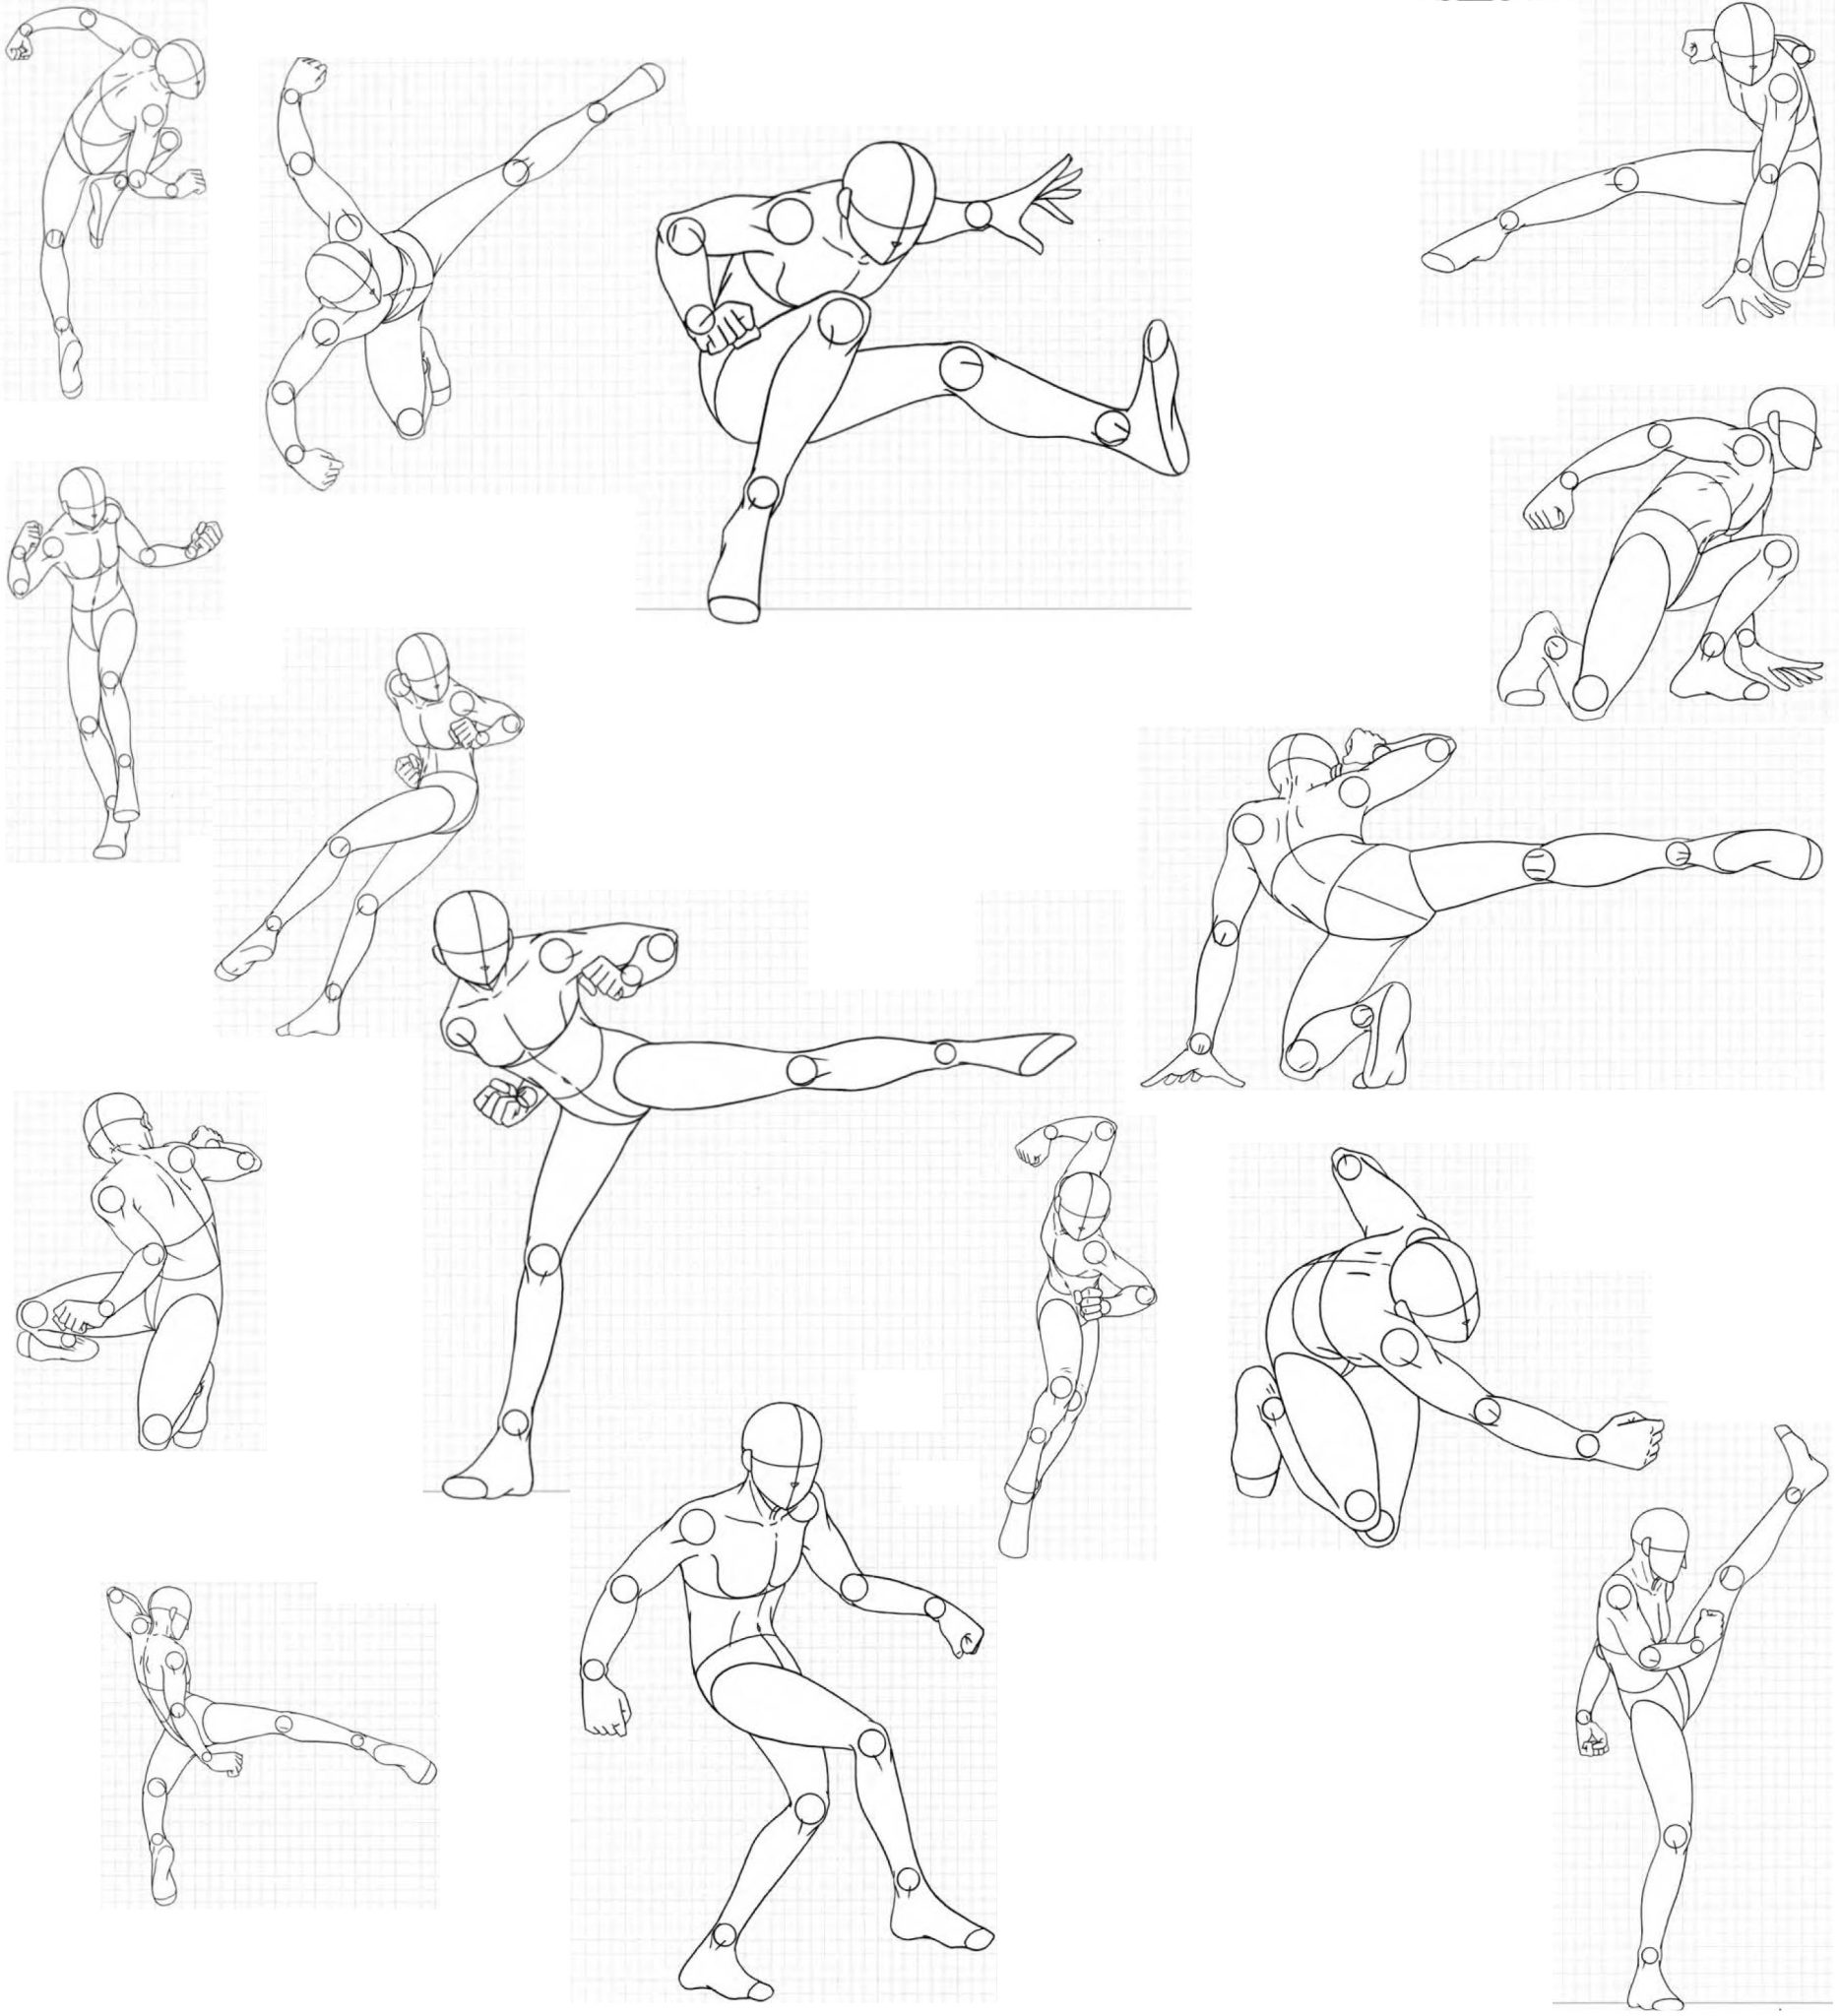 Female Fighting Pose Reference Drawing & Sketch Collection for Artists